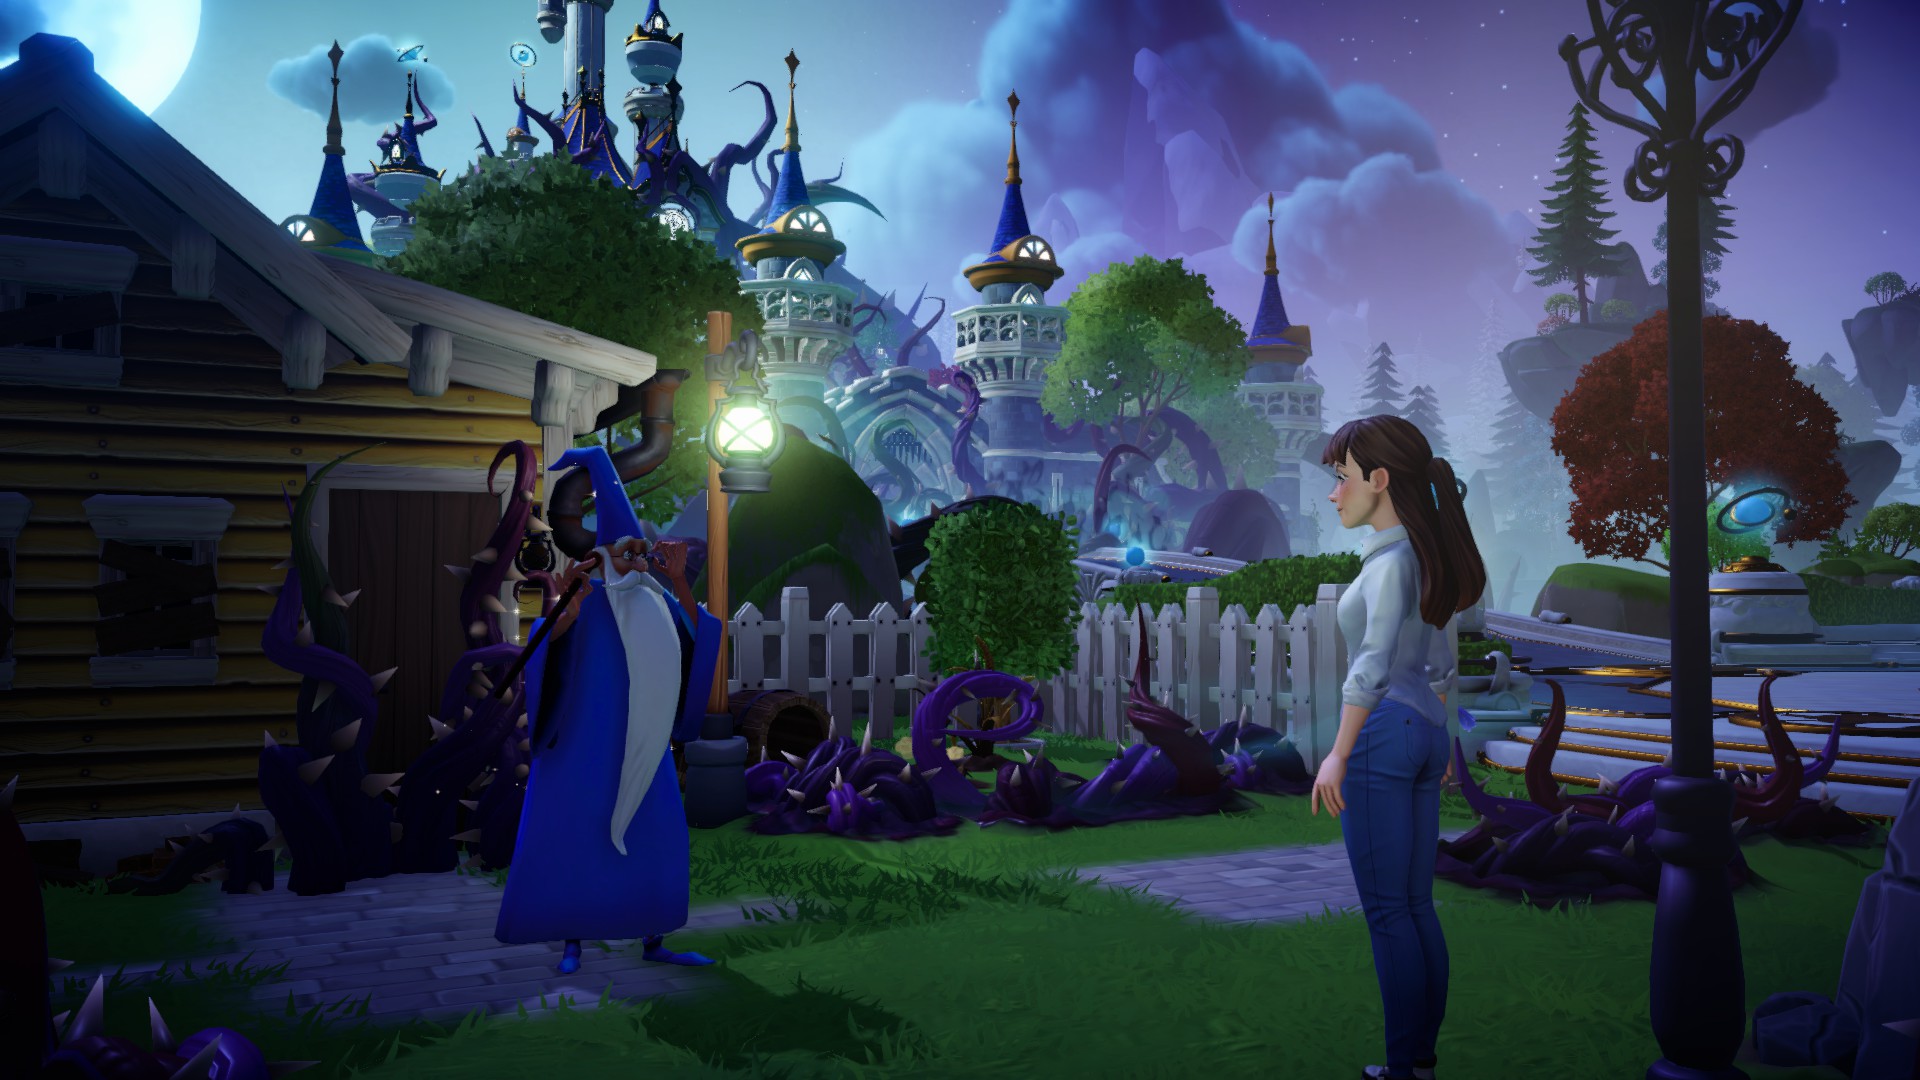 10 Disney Dreamlight Valley tips to help you get started